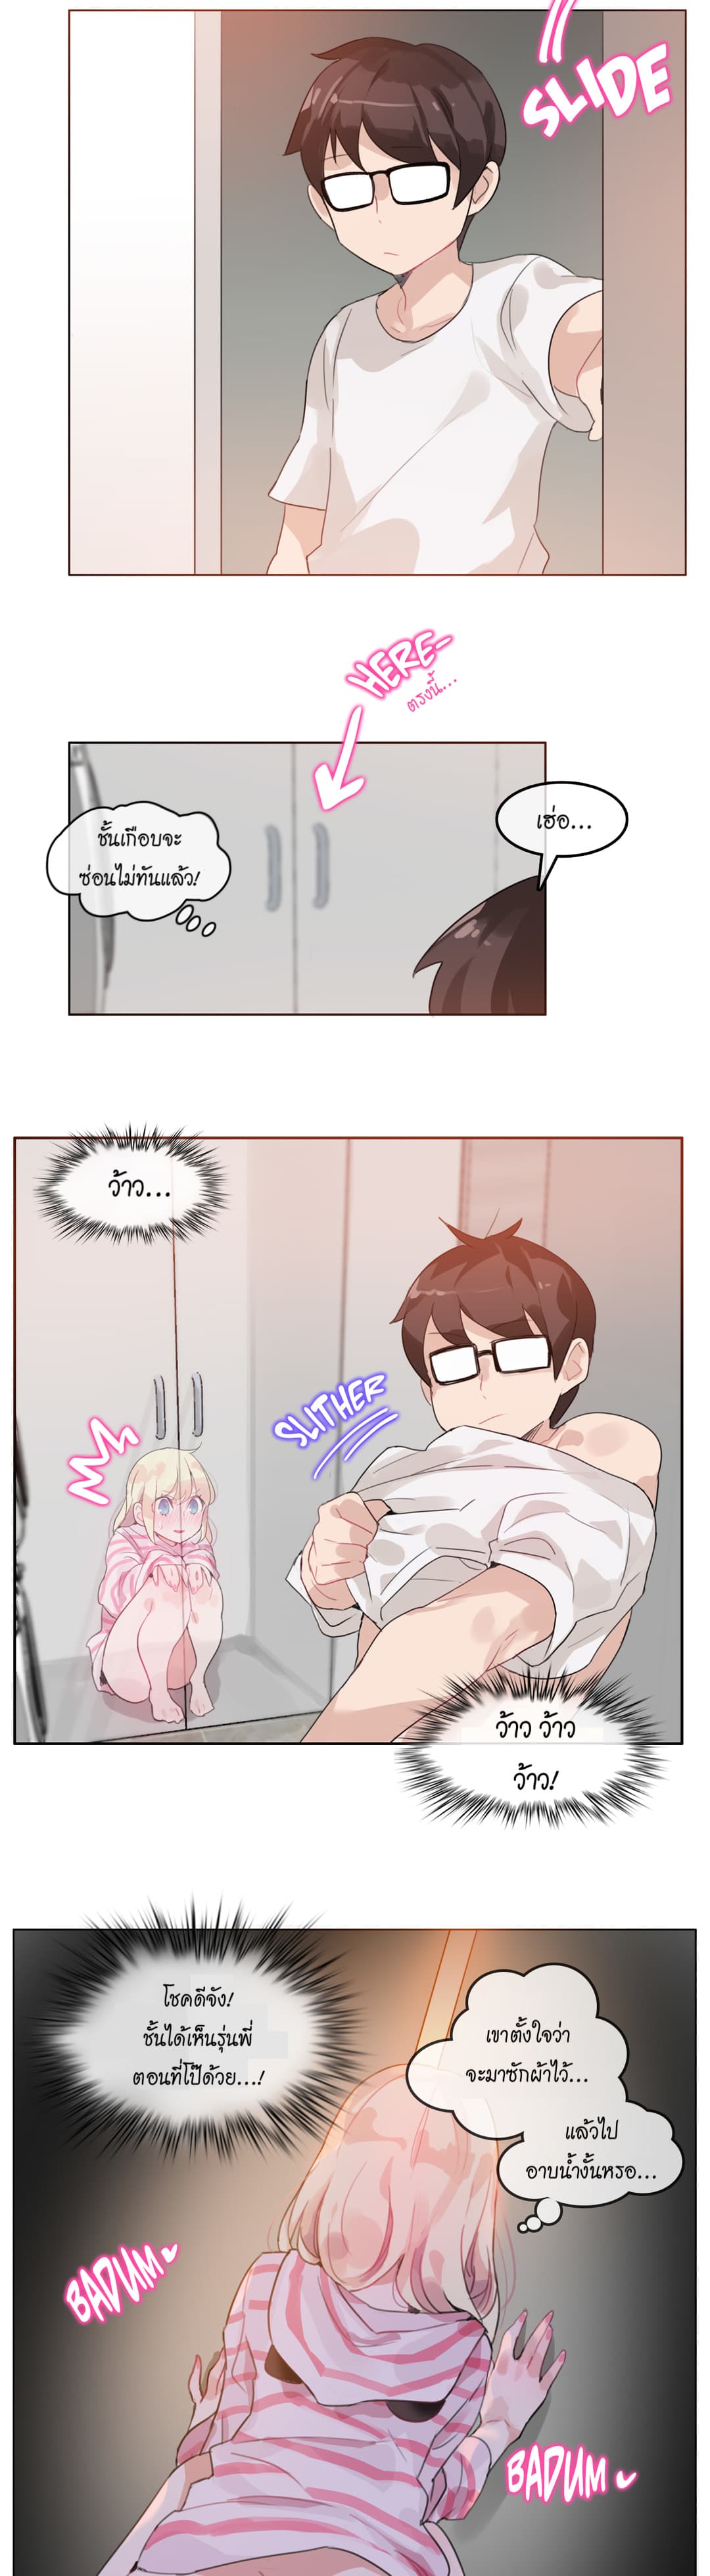 A Pervert’s Daily Life 17 (9)